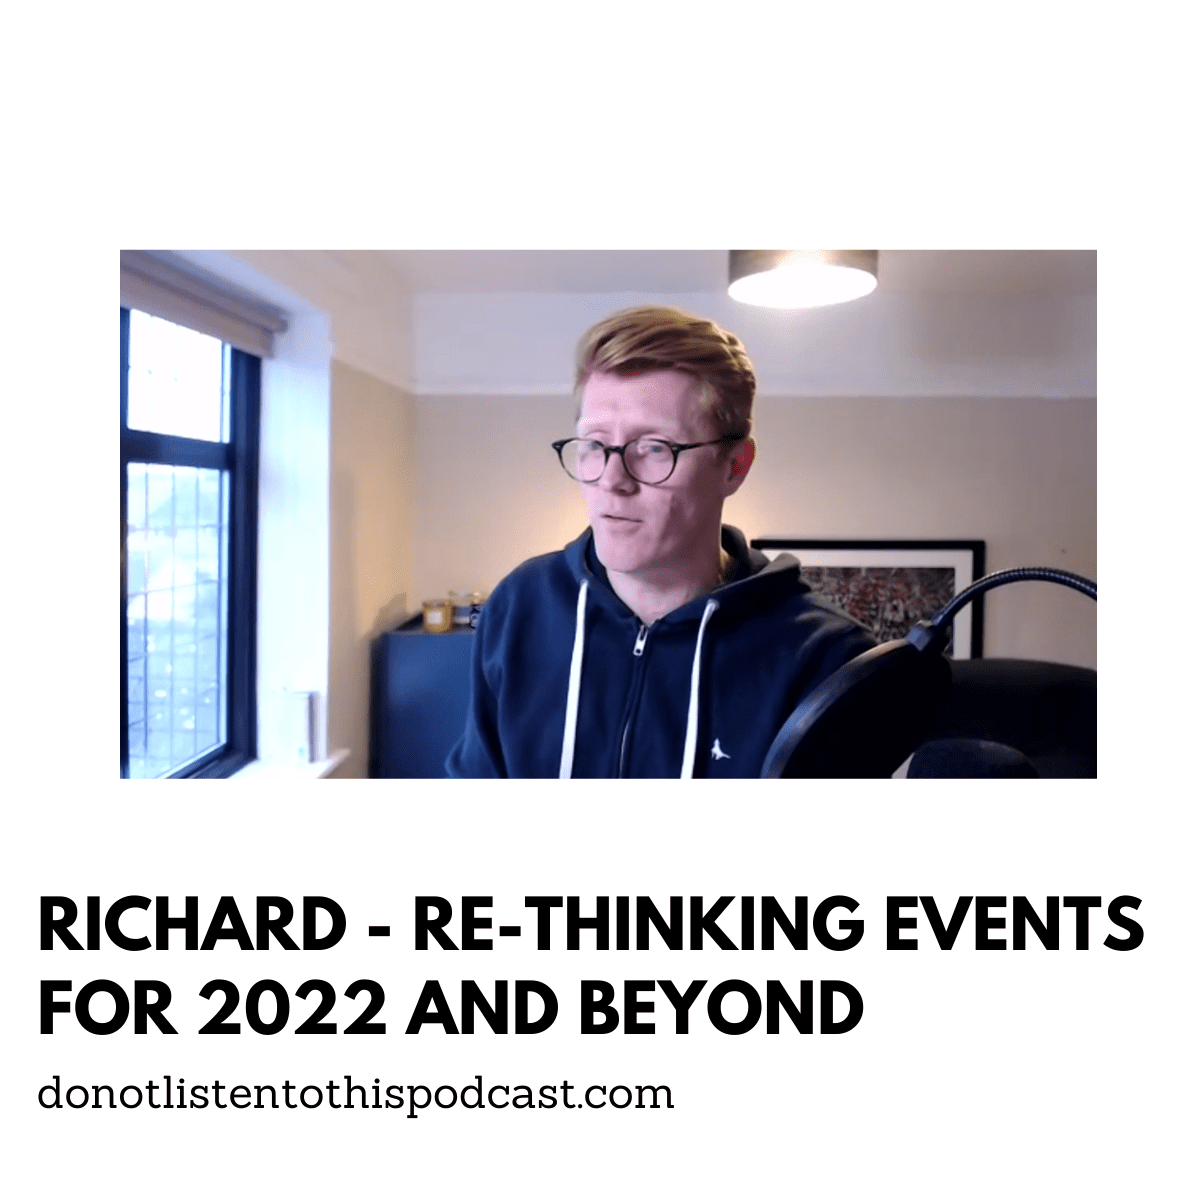 Richard – Re-thinking events for 2022 and beyond post thumbnail image